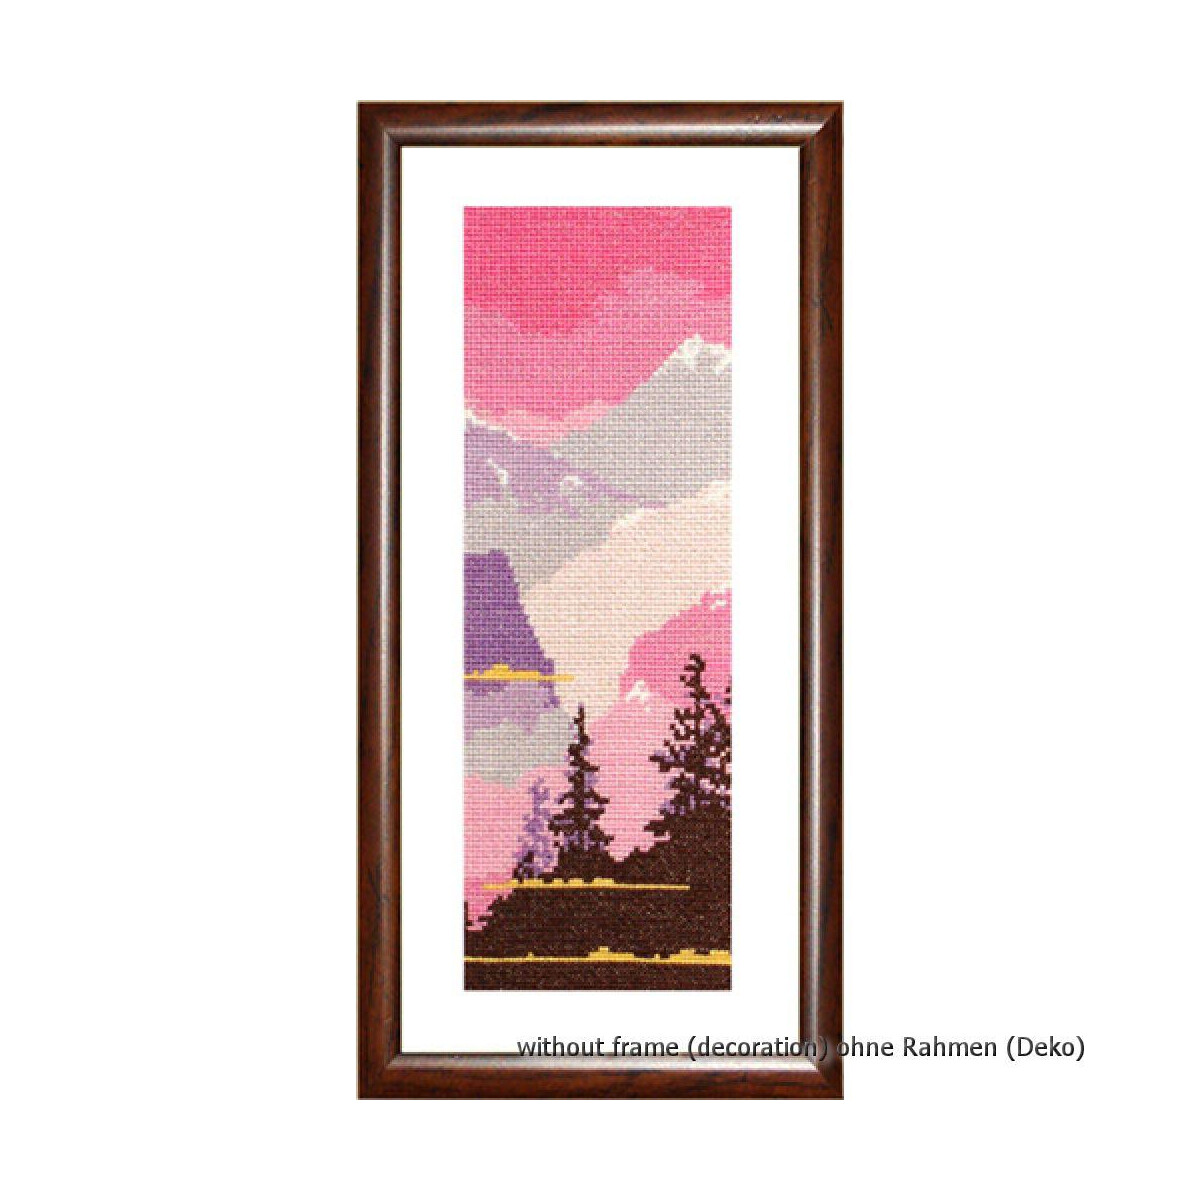 Oven counted cross stitch kit "Landscape II",...